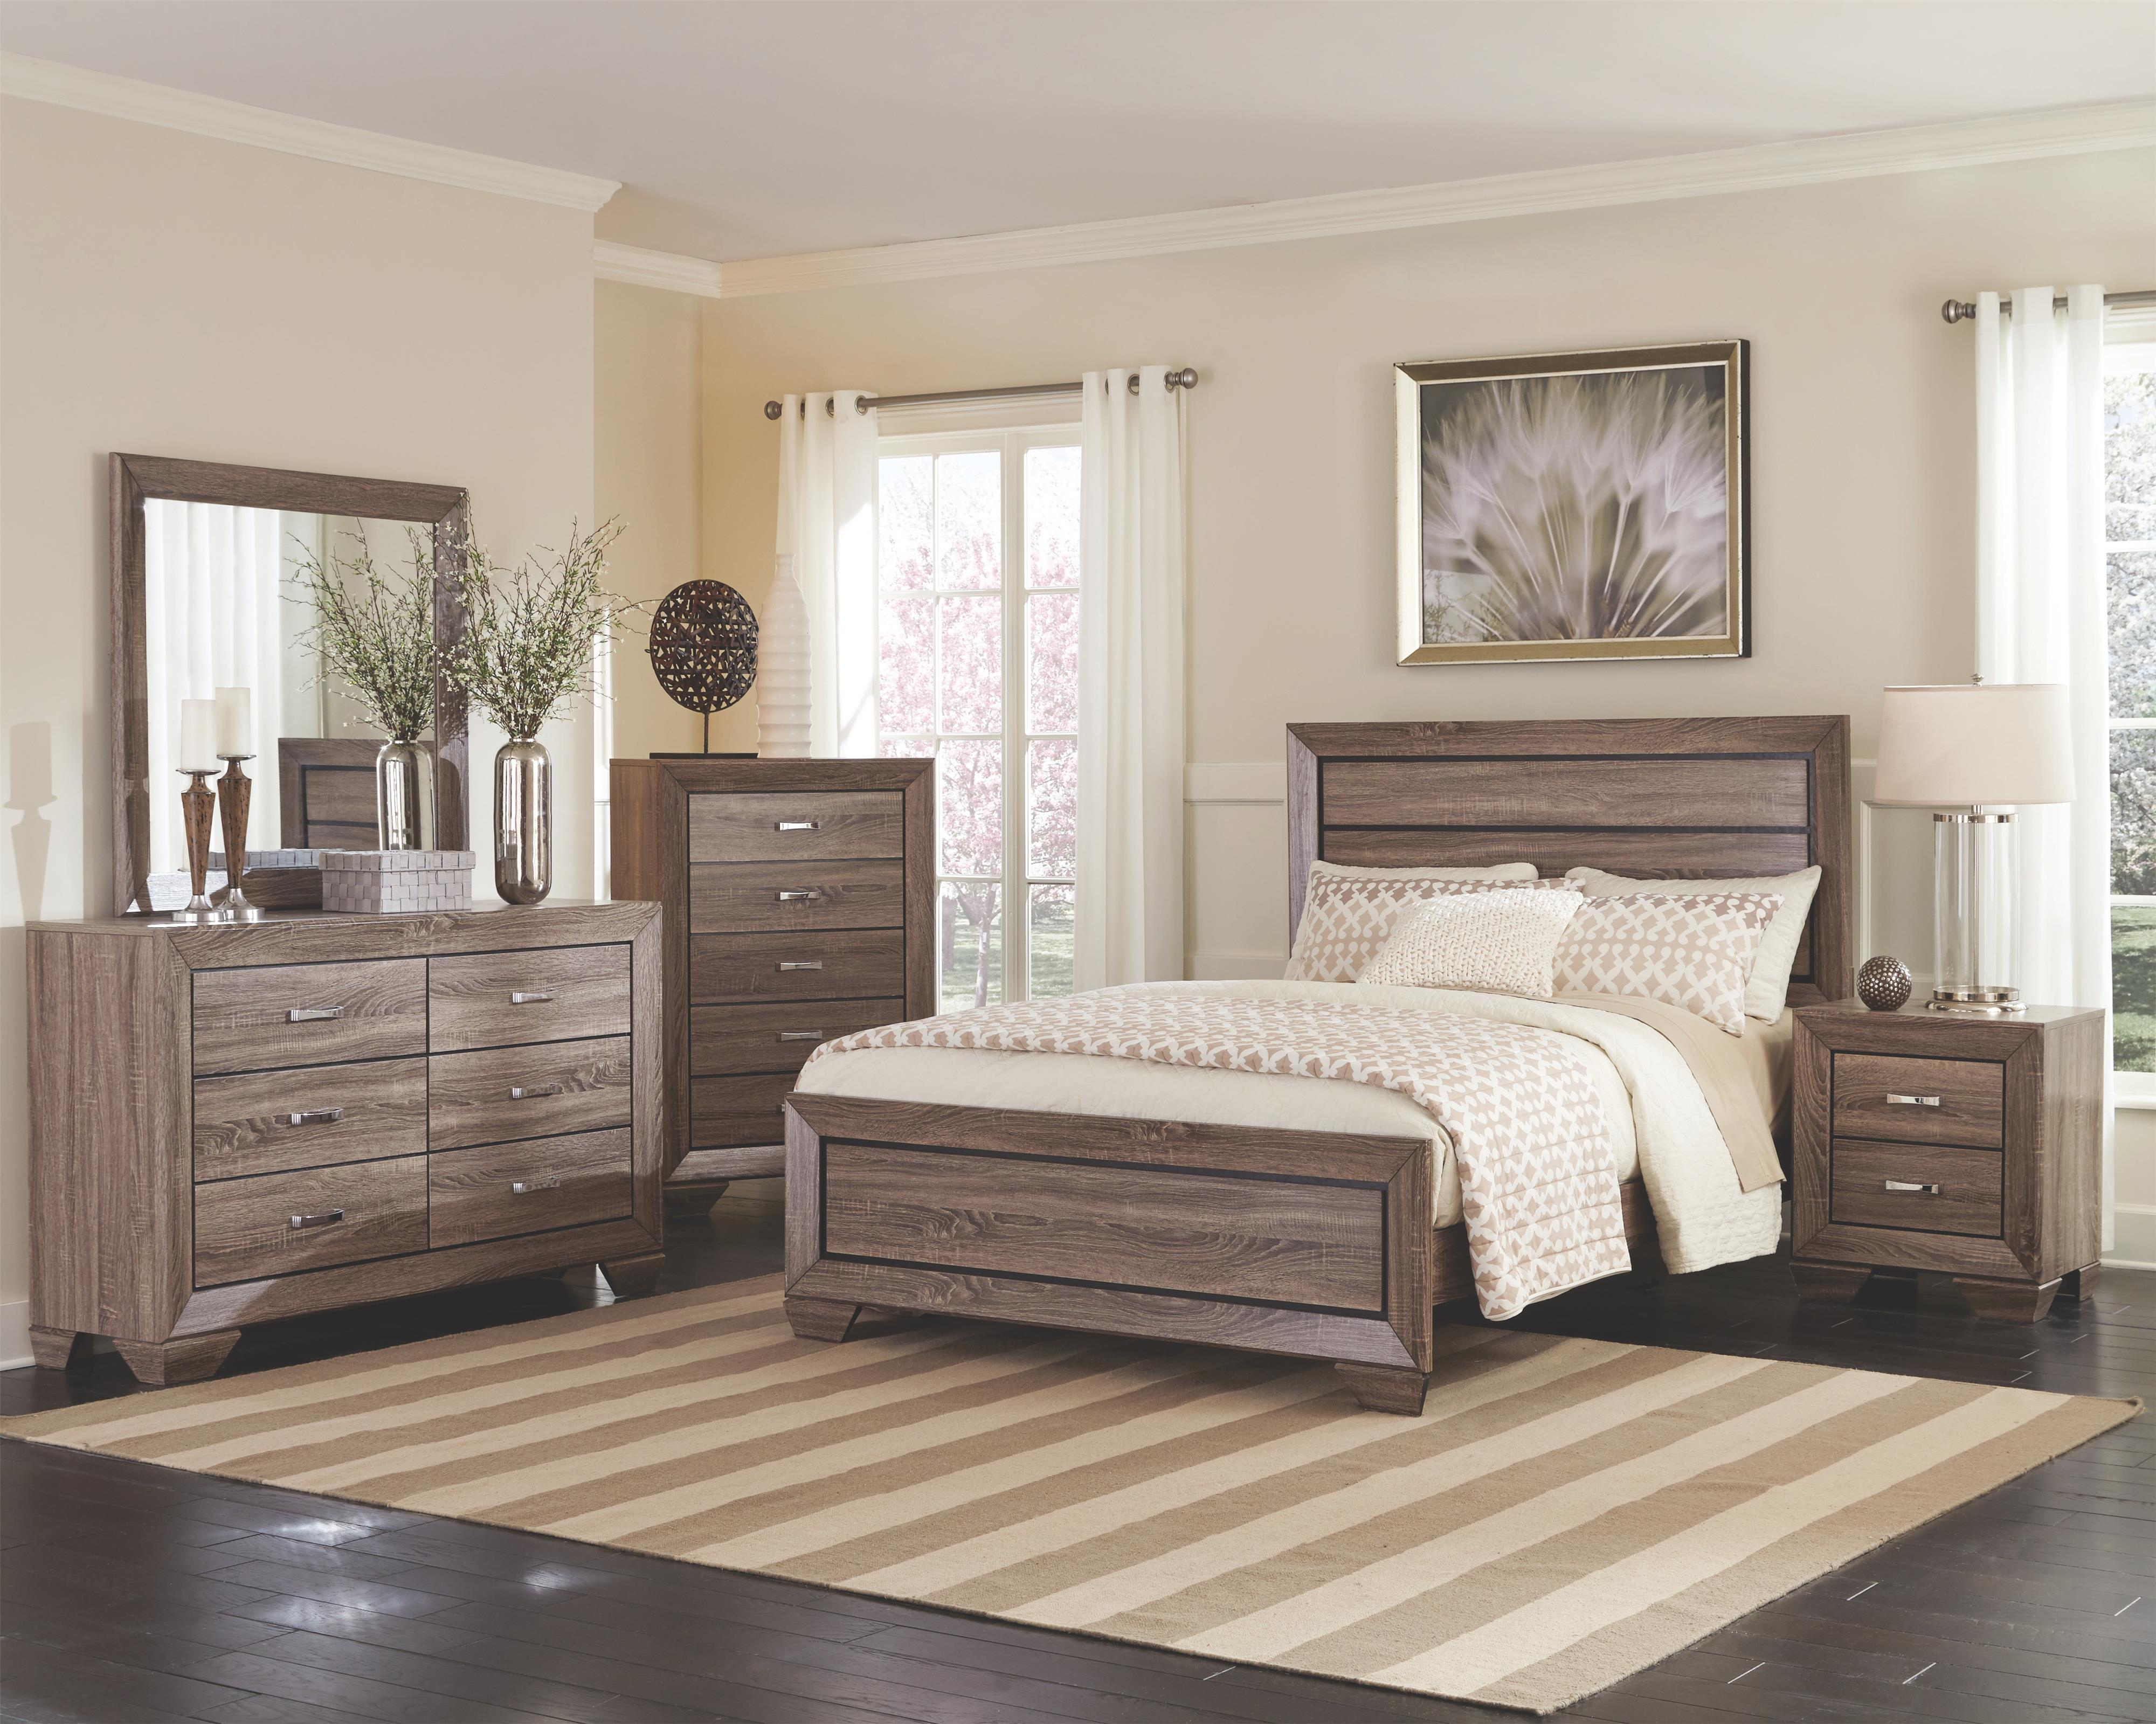 Coaster Furniture Kauffman 4 Piece Panel Bedroom Set In Washed Taupe intended for proportions 4000 X 3199